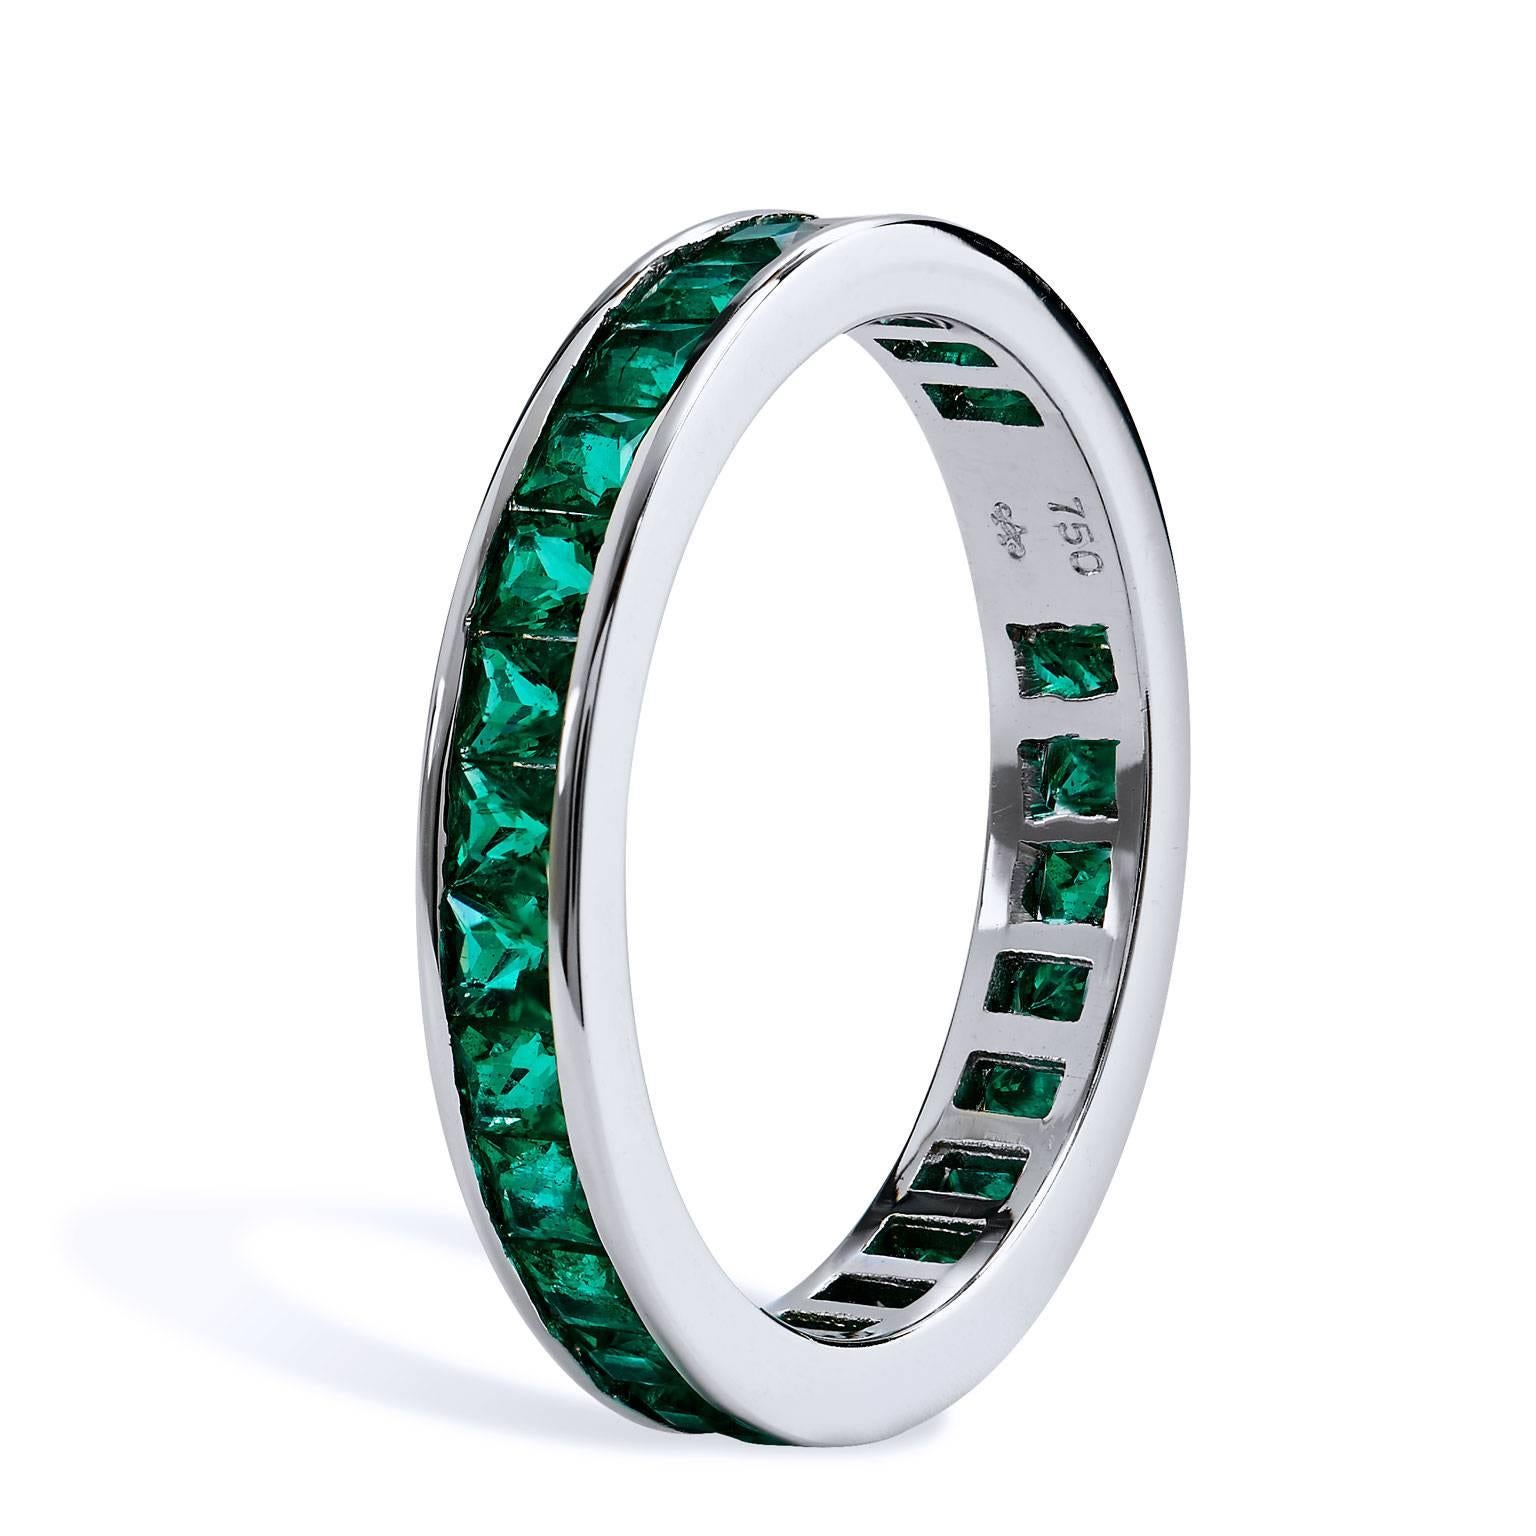 18 karat White Gold Emerald Eternity Band Princess Cut 1.14 Total Carat 

This stunning eternity band contains twenty nine princess cut emeralds. 
The band is crafted in eighteen karat white gold. 
A classic channel setting maximizes the bright